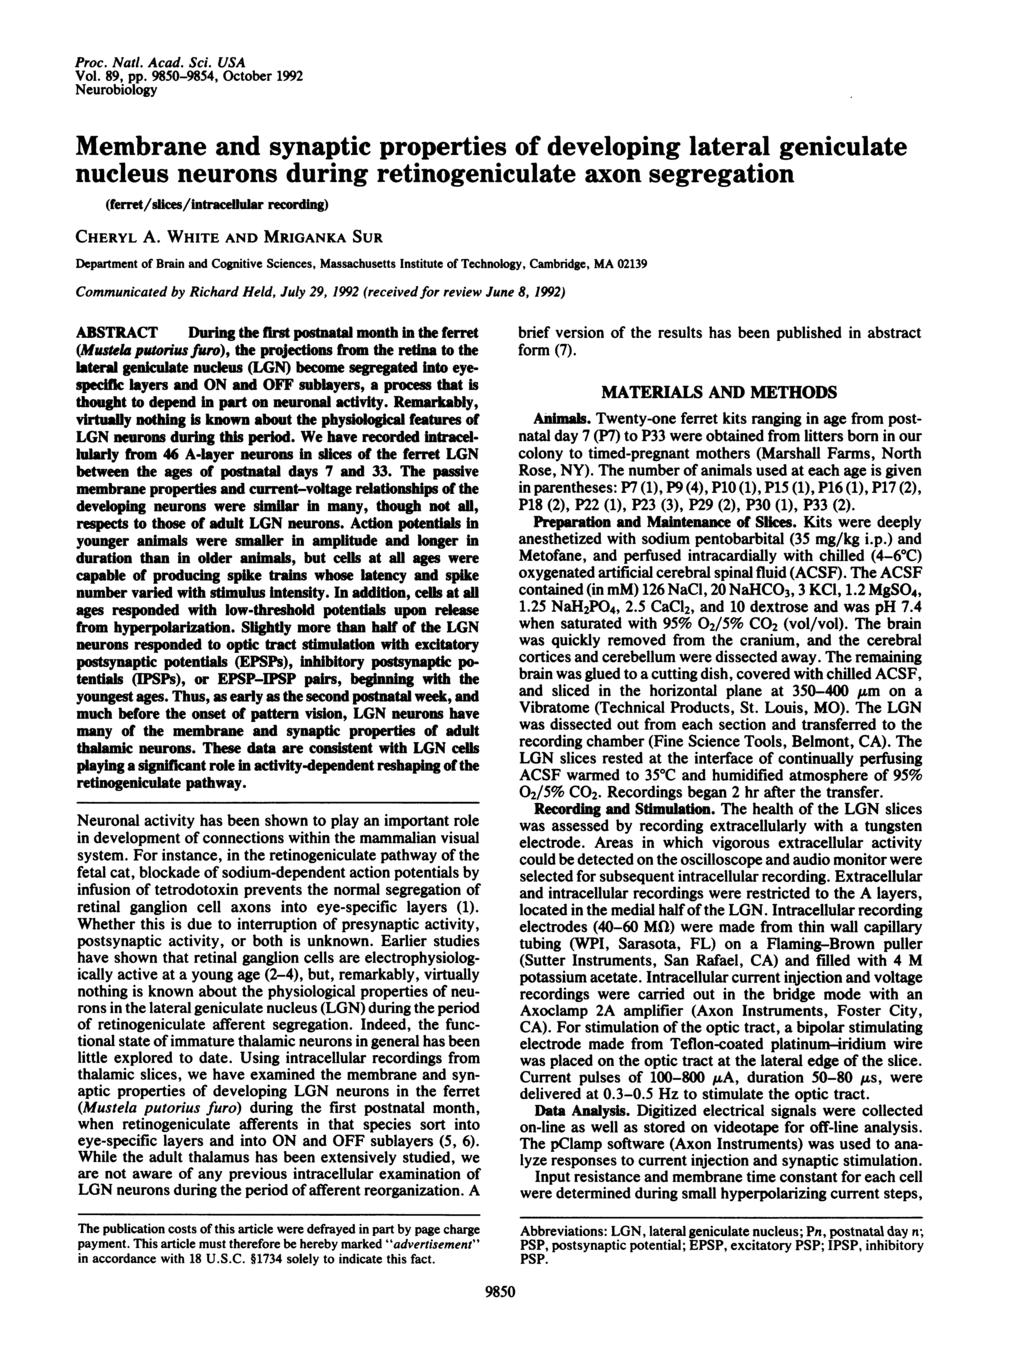 Proc Natd Acad Sci USA Vol 89, pp 985-9854, October 1992 Neurobiology Membrane and synaptic properties of developing lateral geniculate nucleus neurons during retinogeniculate axon segregation